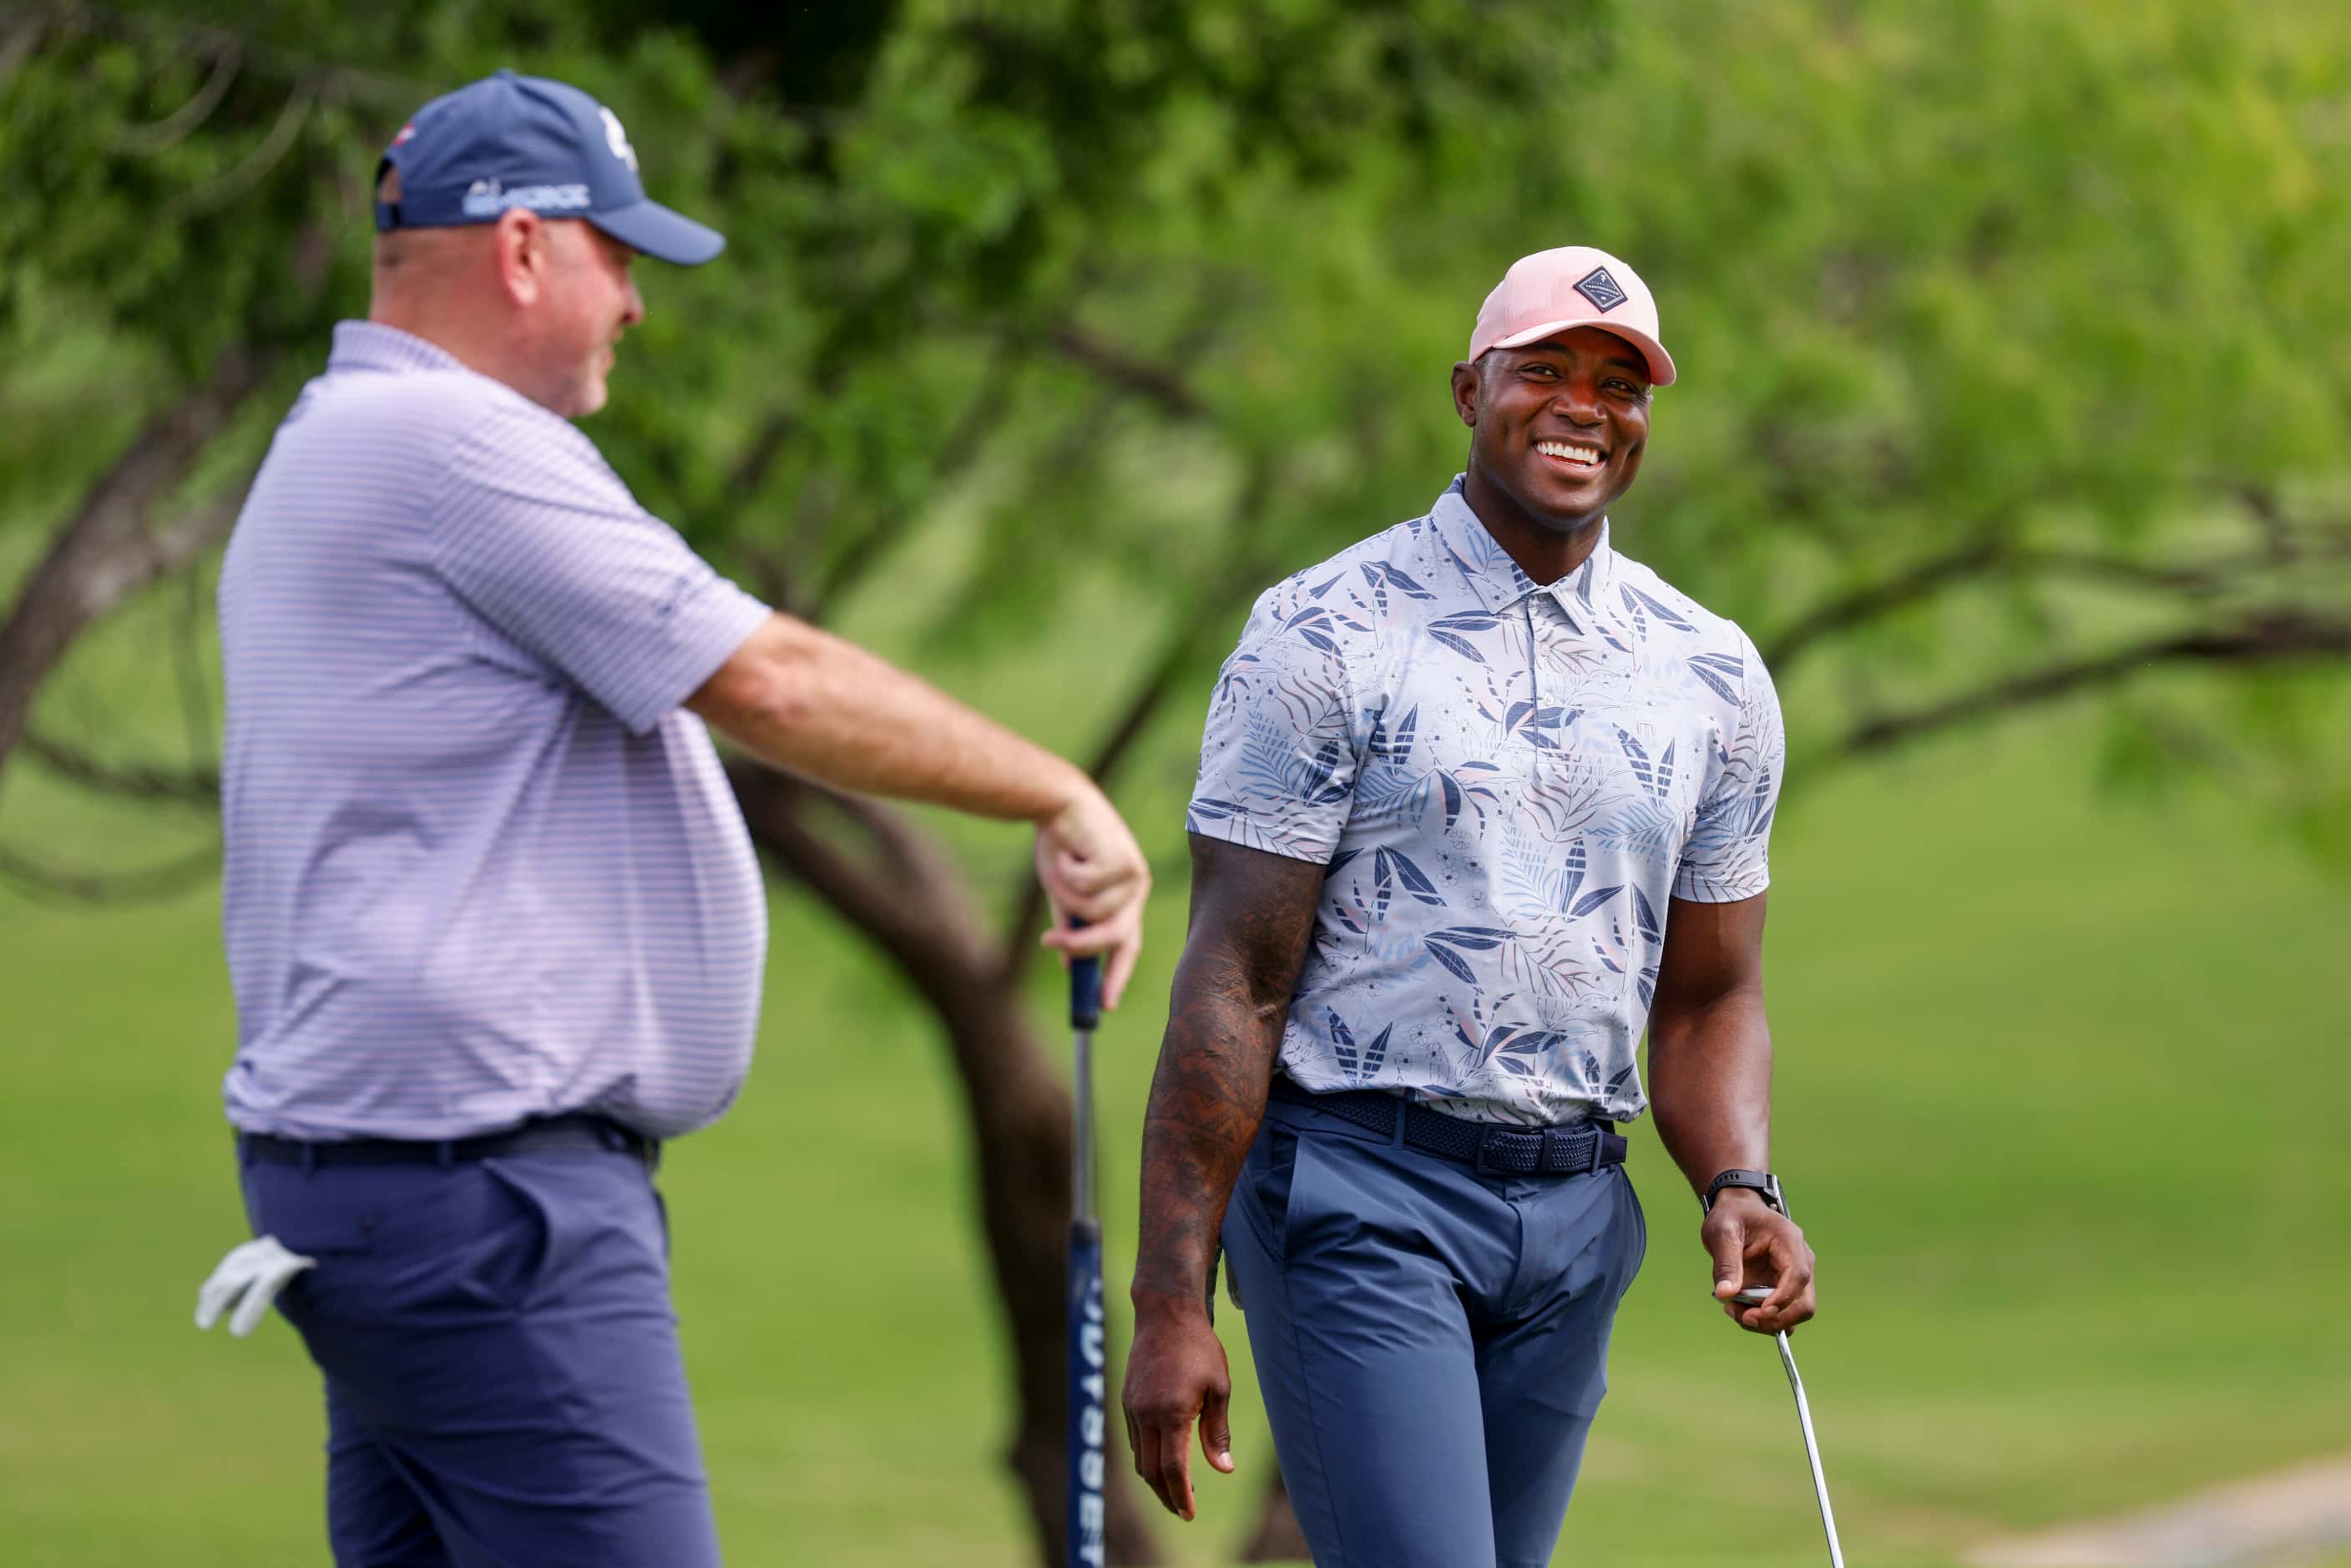 Former Dallas Cowboys player DeMarcus Ware smiles as he talks with professional golfer...